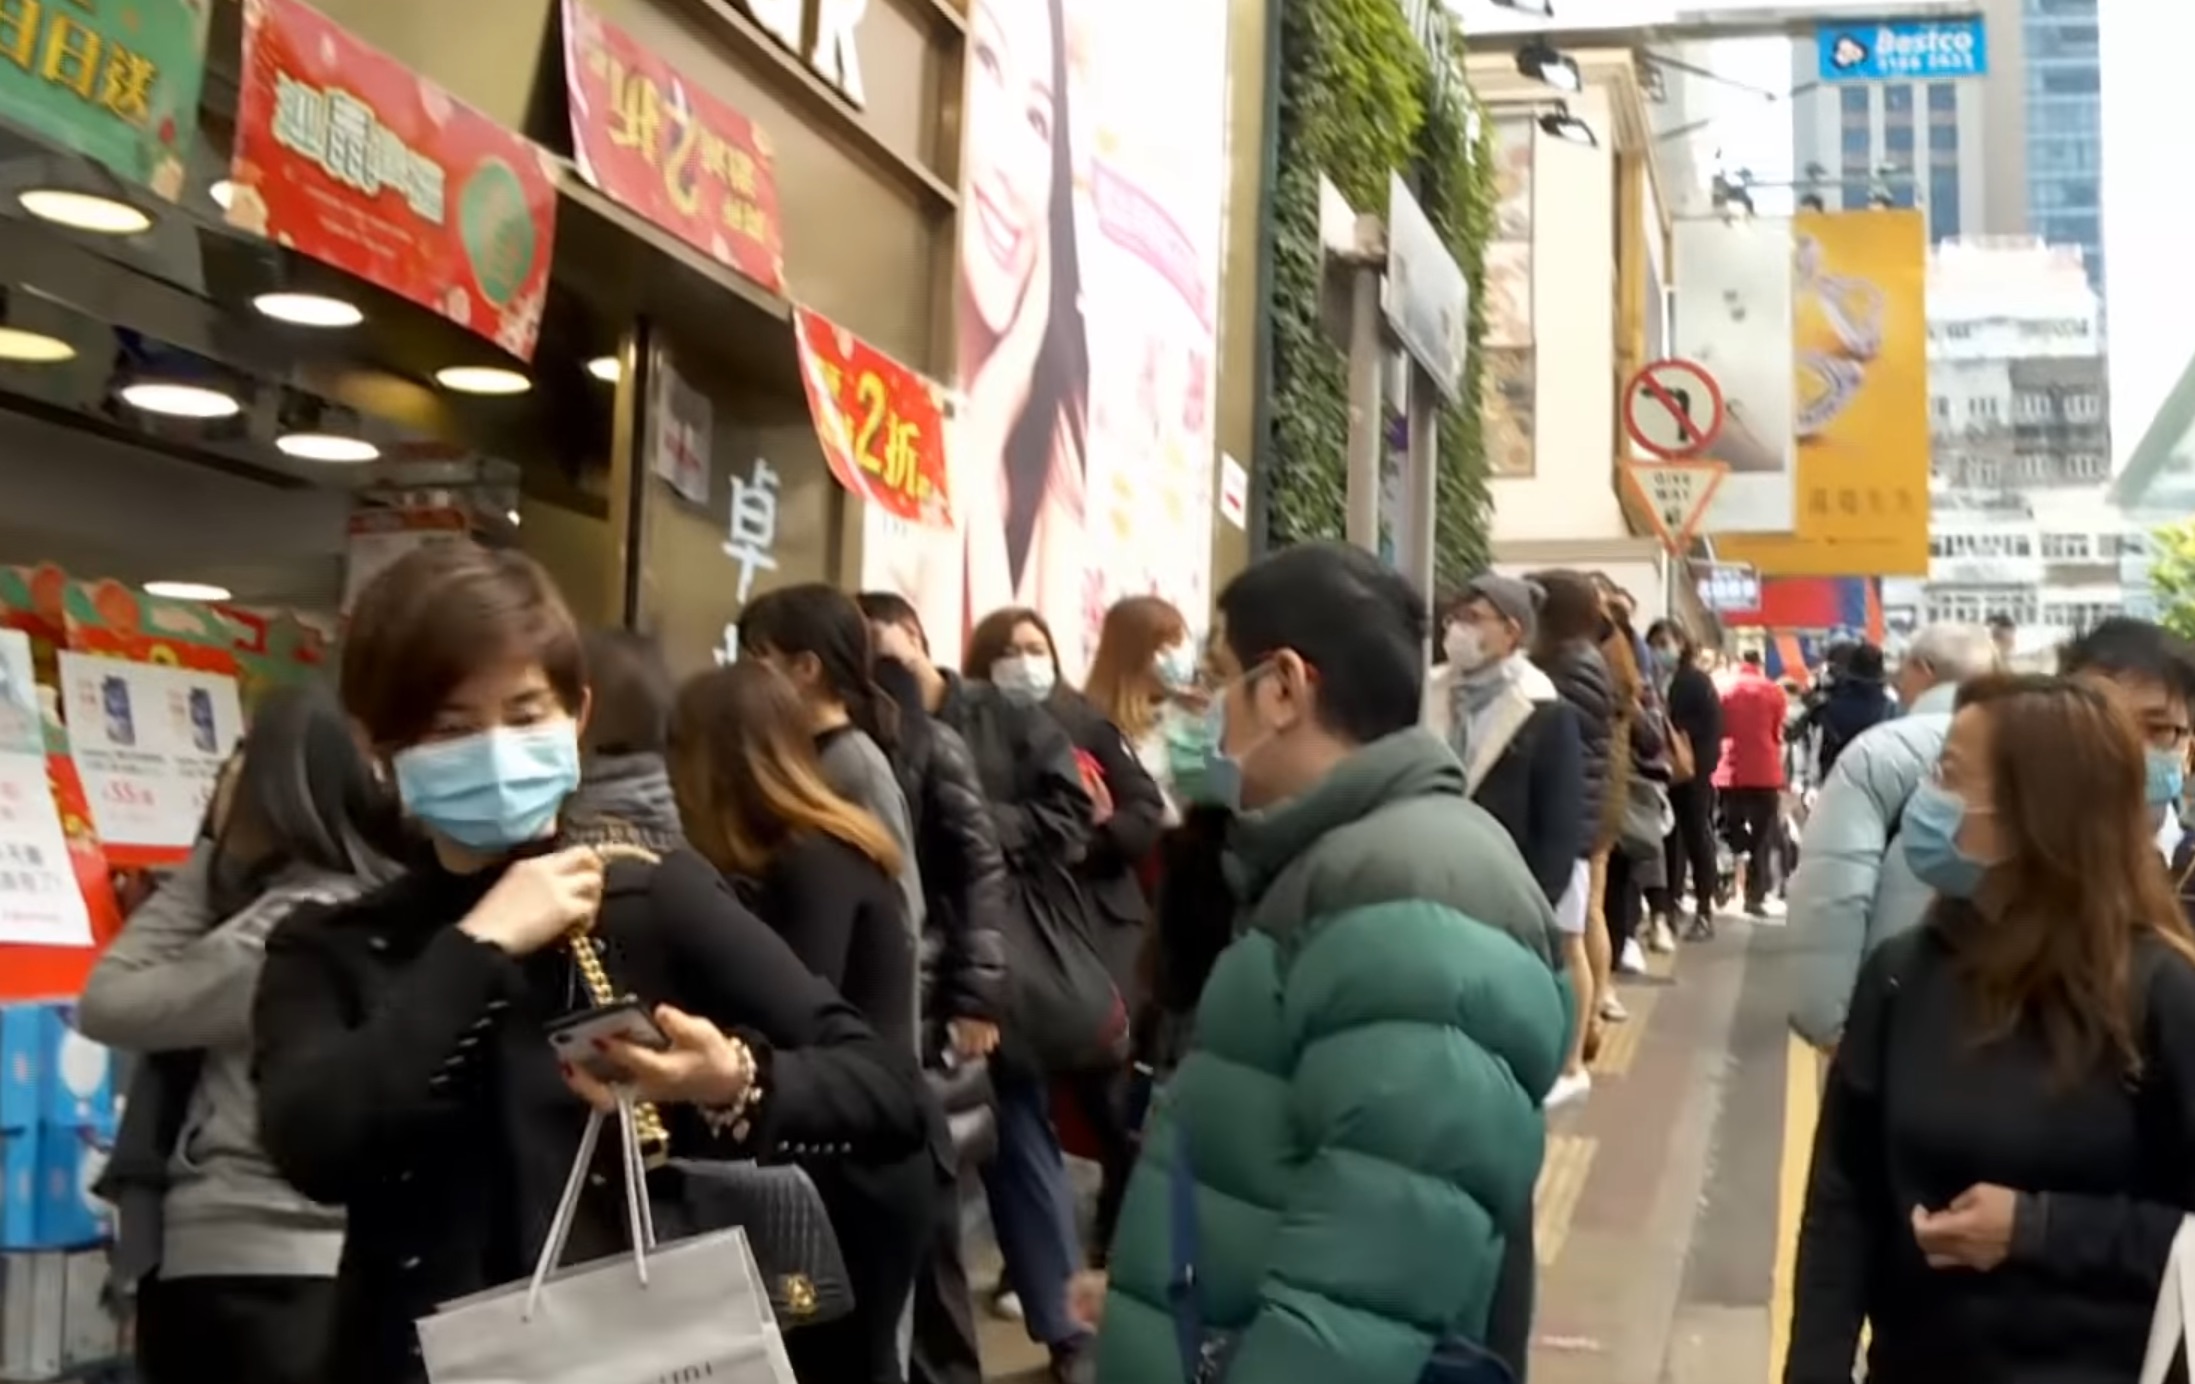 People line up outside a pharmacy in Hong Kong in February in hopes of buying face masks amid a citywide shortage. Screengrab via YouTube.